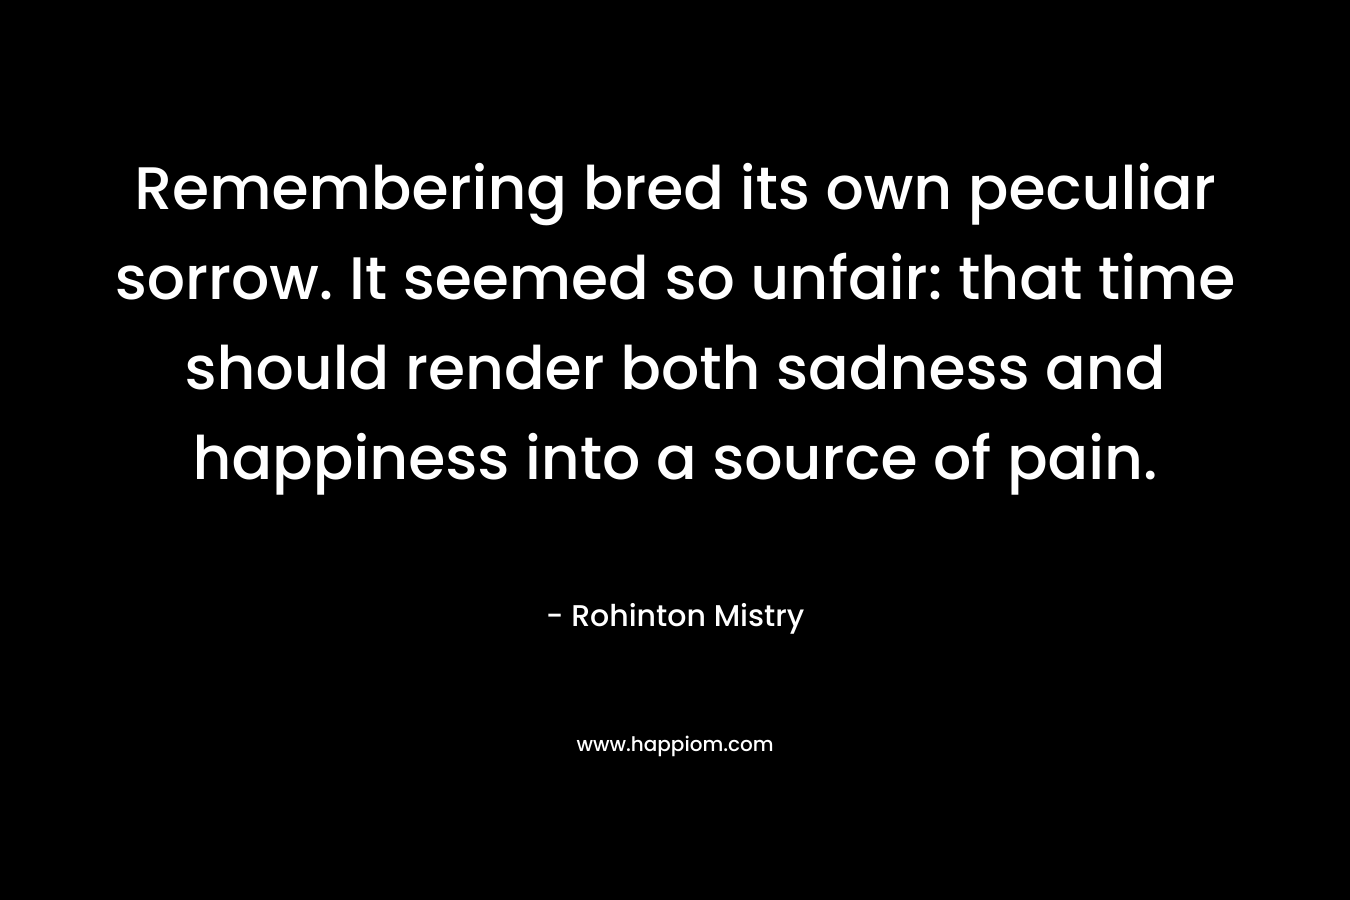 Remembering bred its own peculiar sorrow. It seemed so unfair: that time should render both sadness and happiness into a source of pain. – Rohinton Mistry